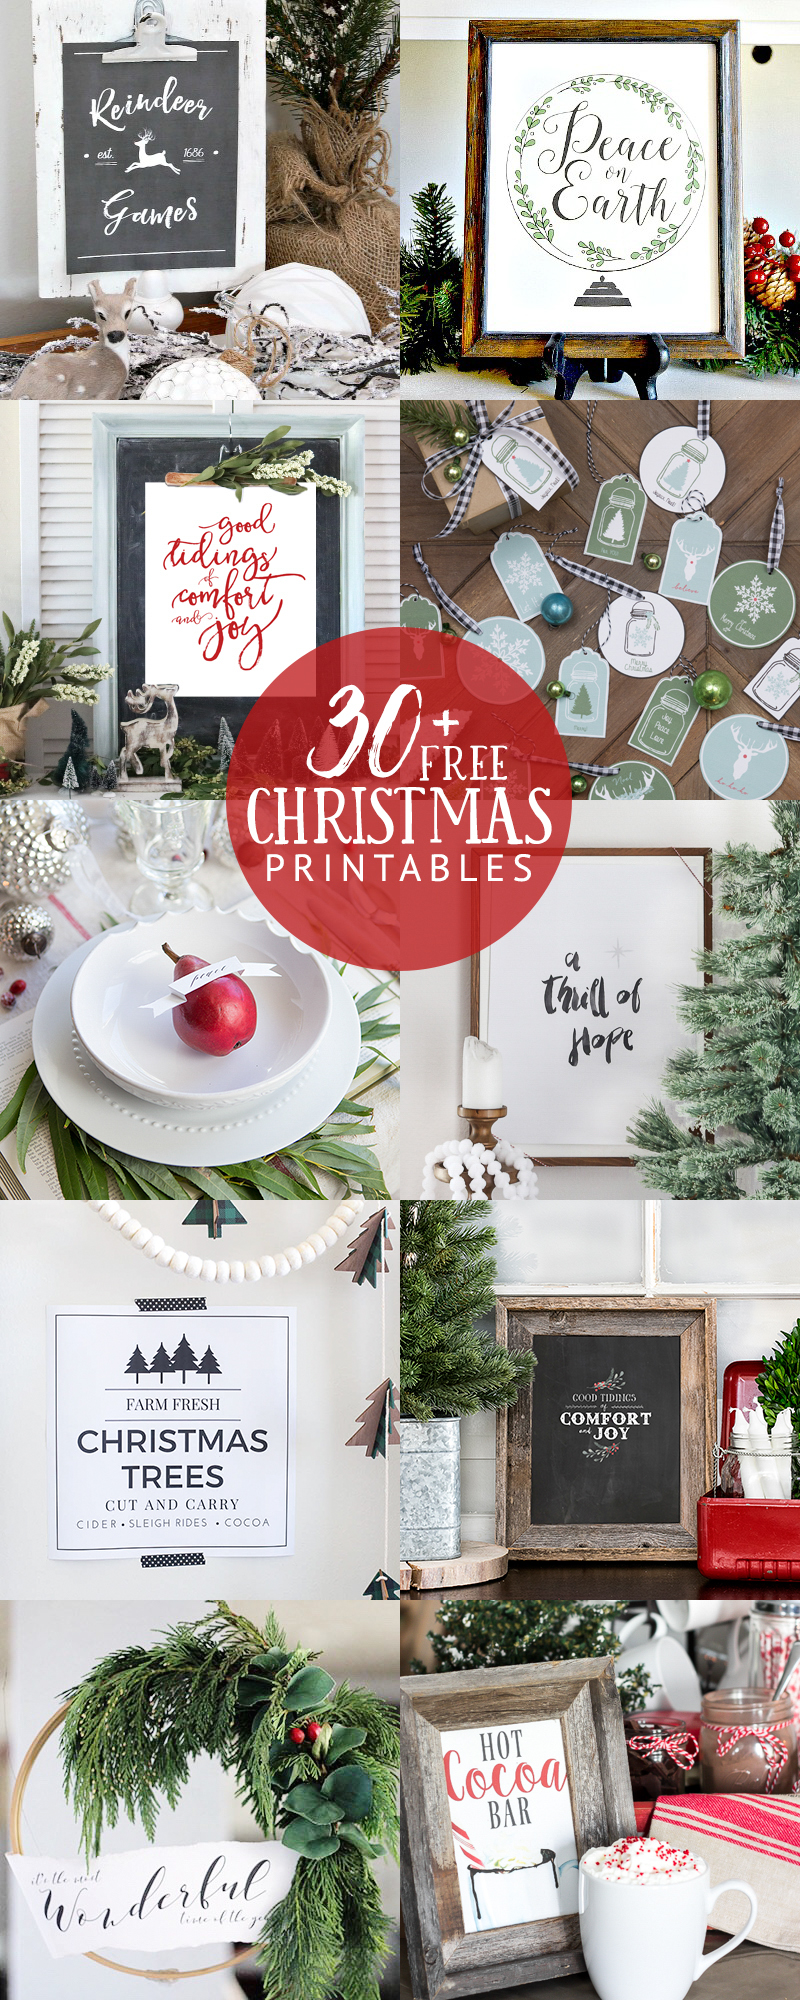 Download this Have Yourself a Merry Little Christmas printable to add a touch of holiday charm to your home during the Christmas season.